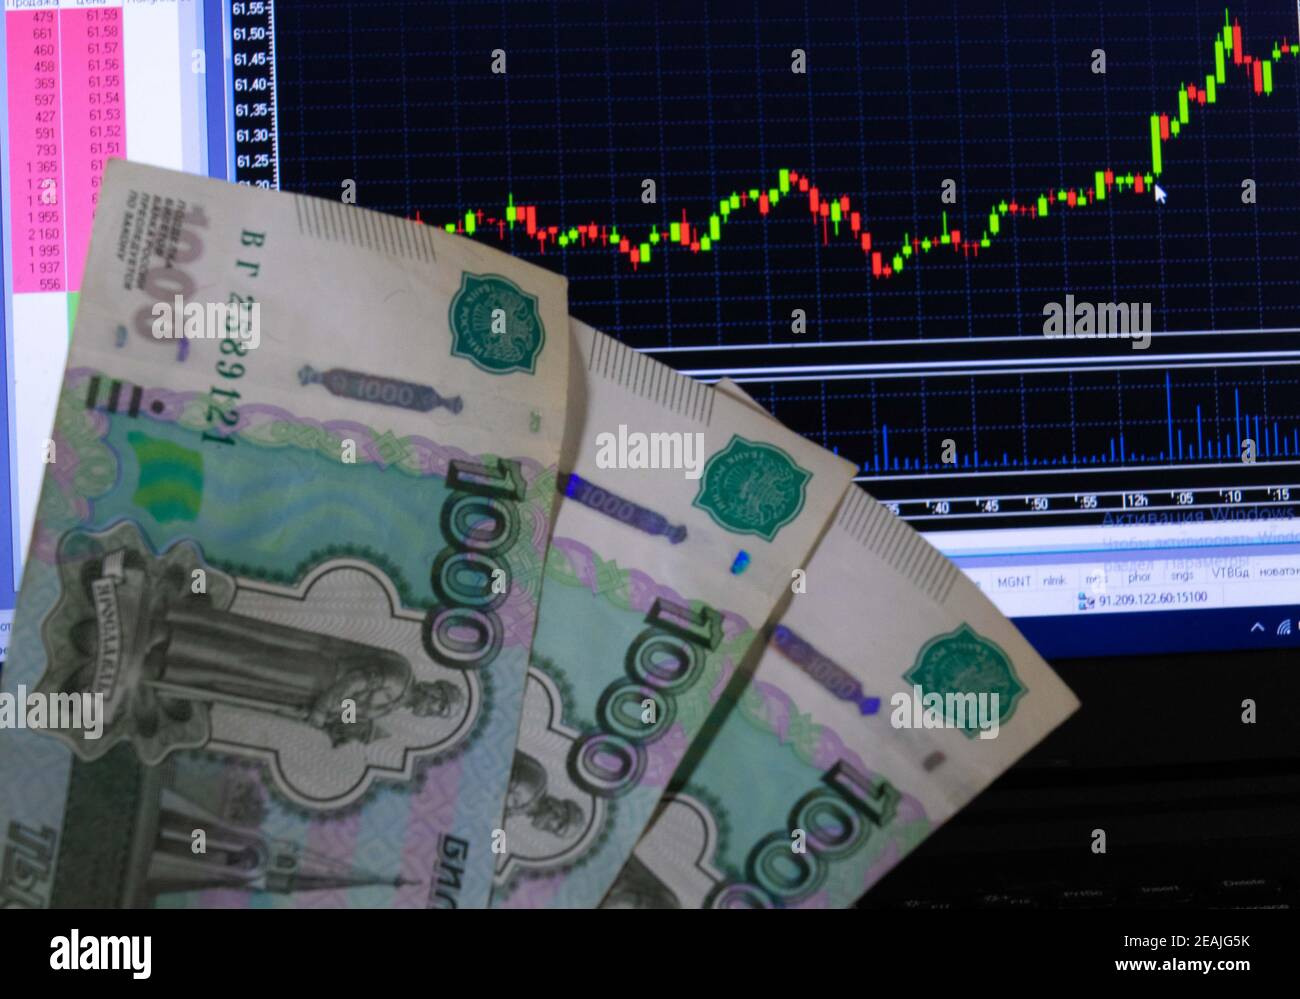 Candlelight red green graph and paper rubles 2021 Stock Photo